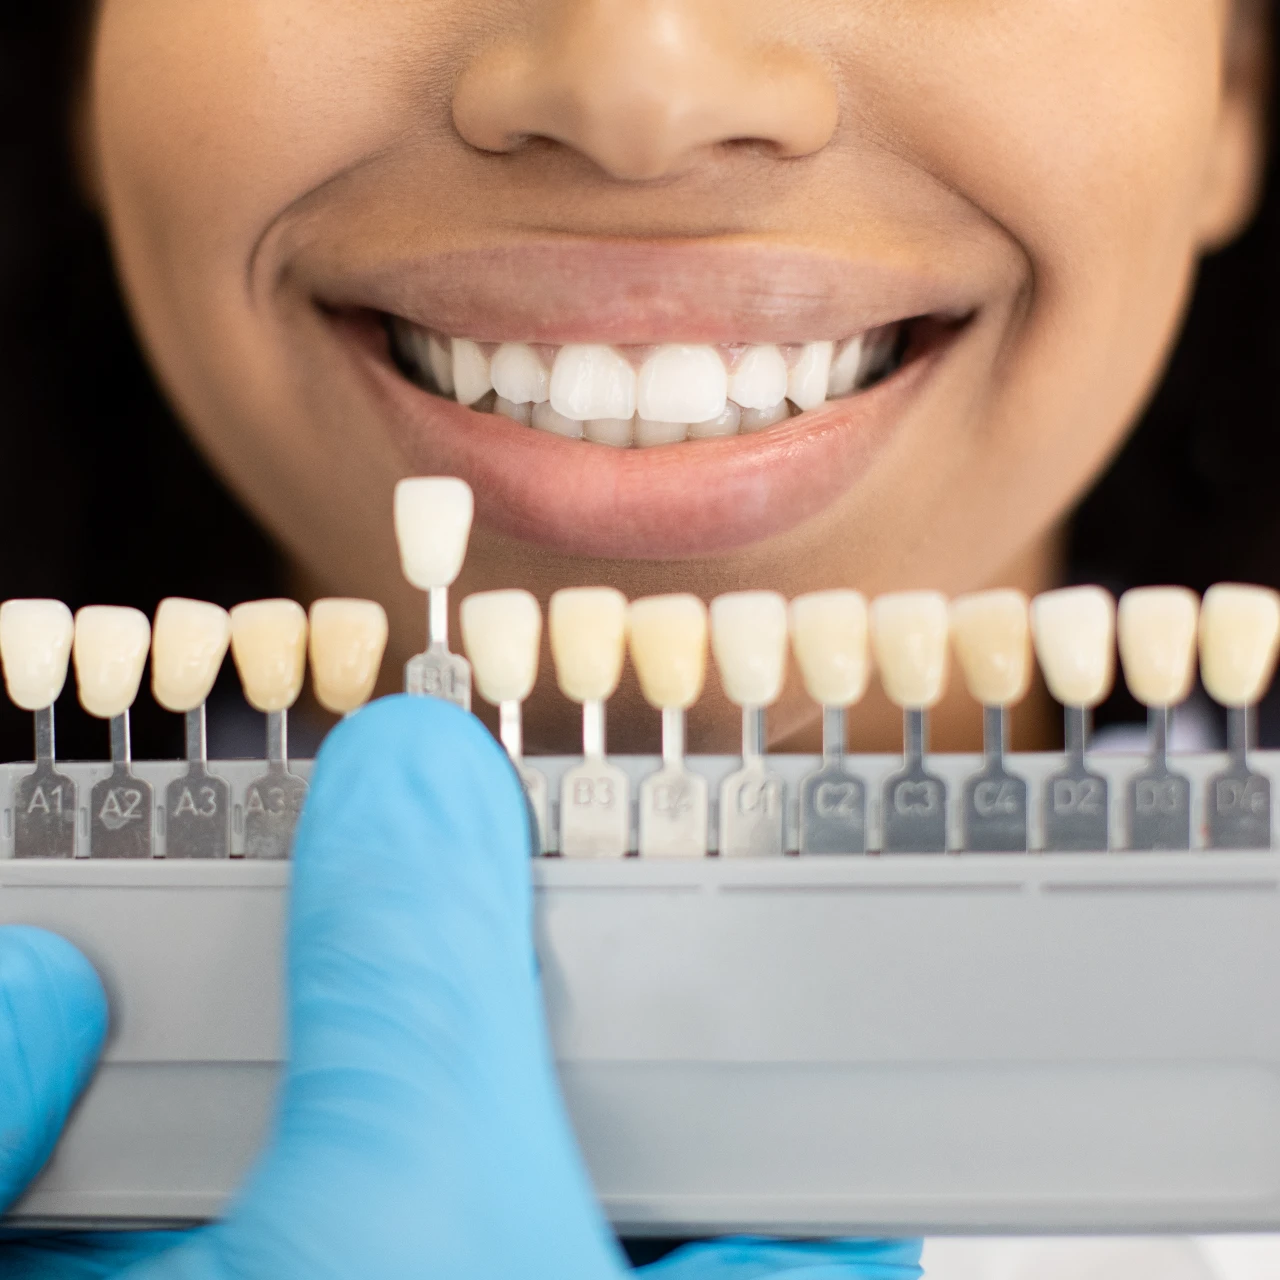 woman comparing different shades of porcelain veneers at dentist office